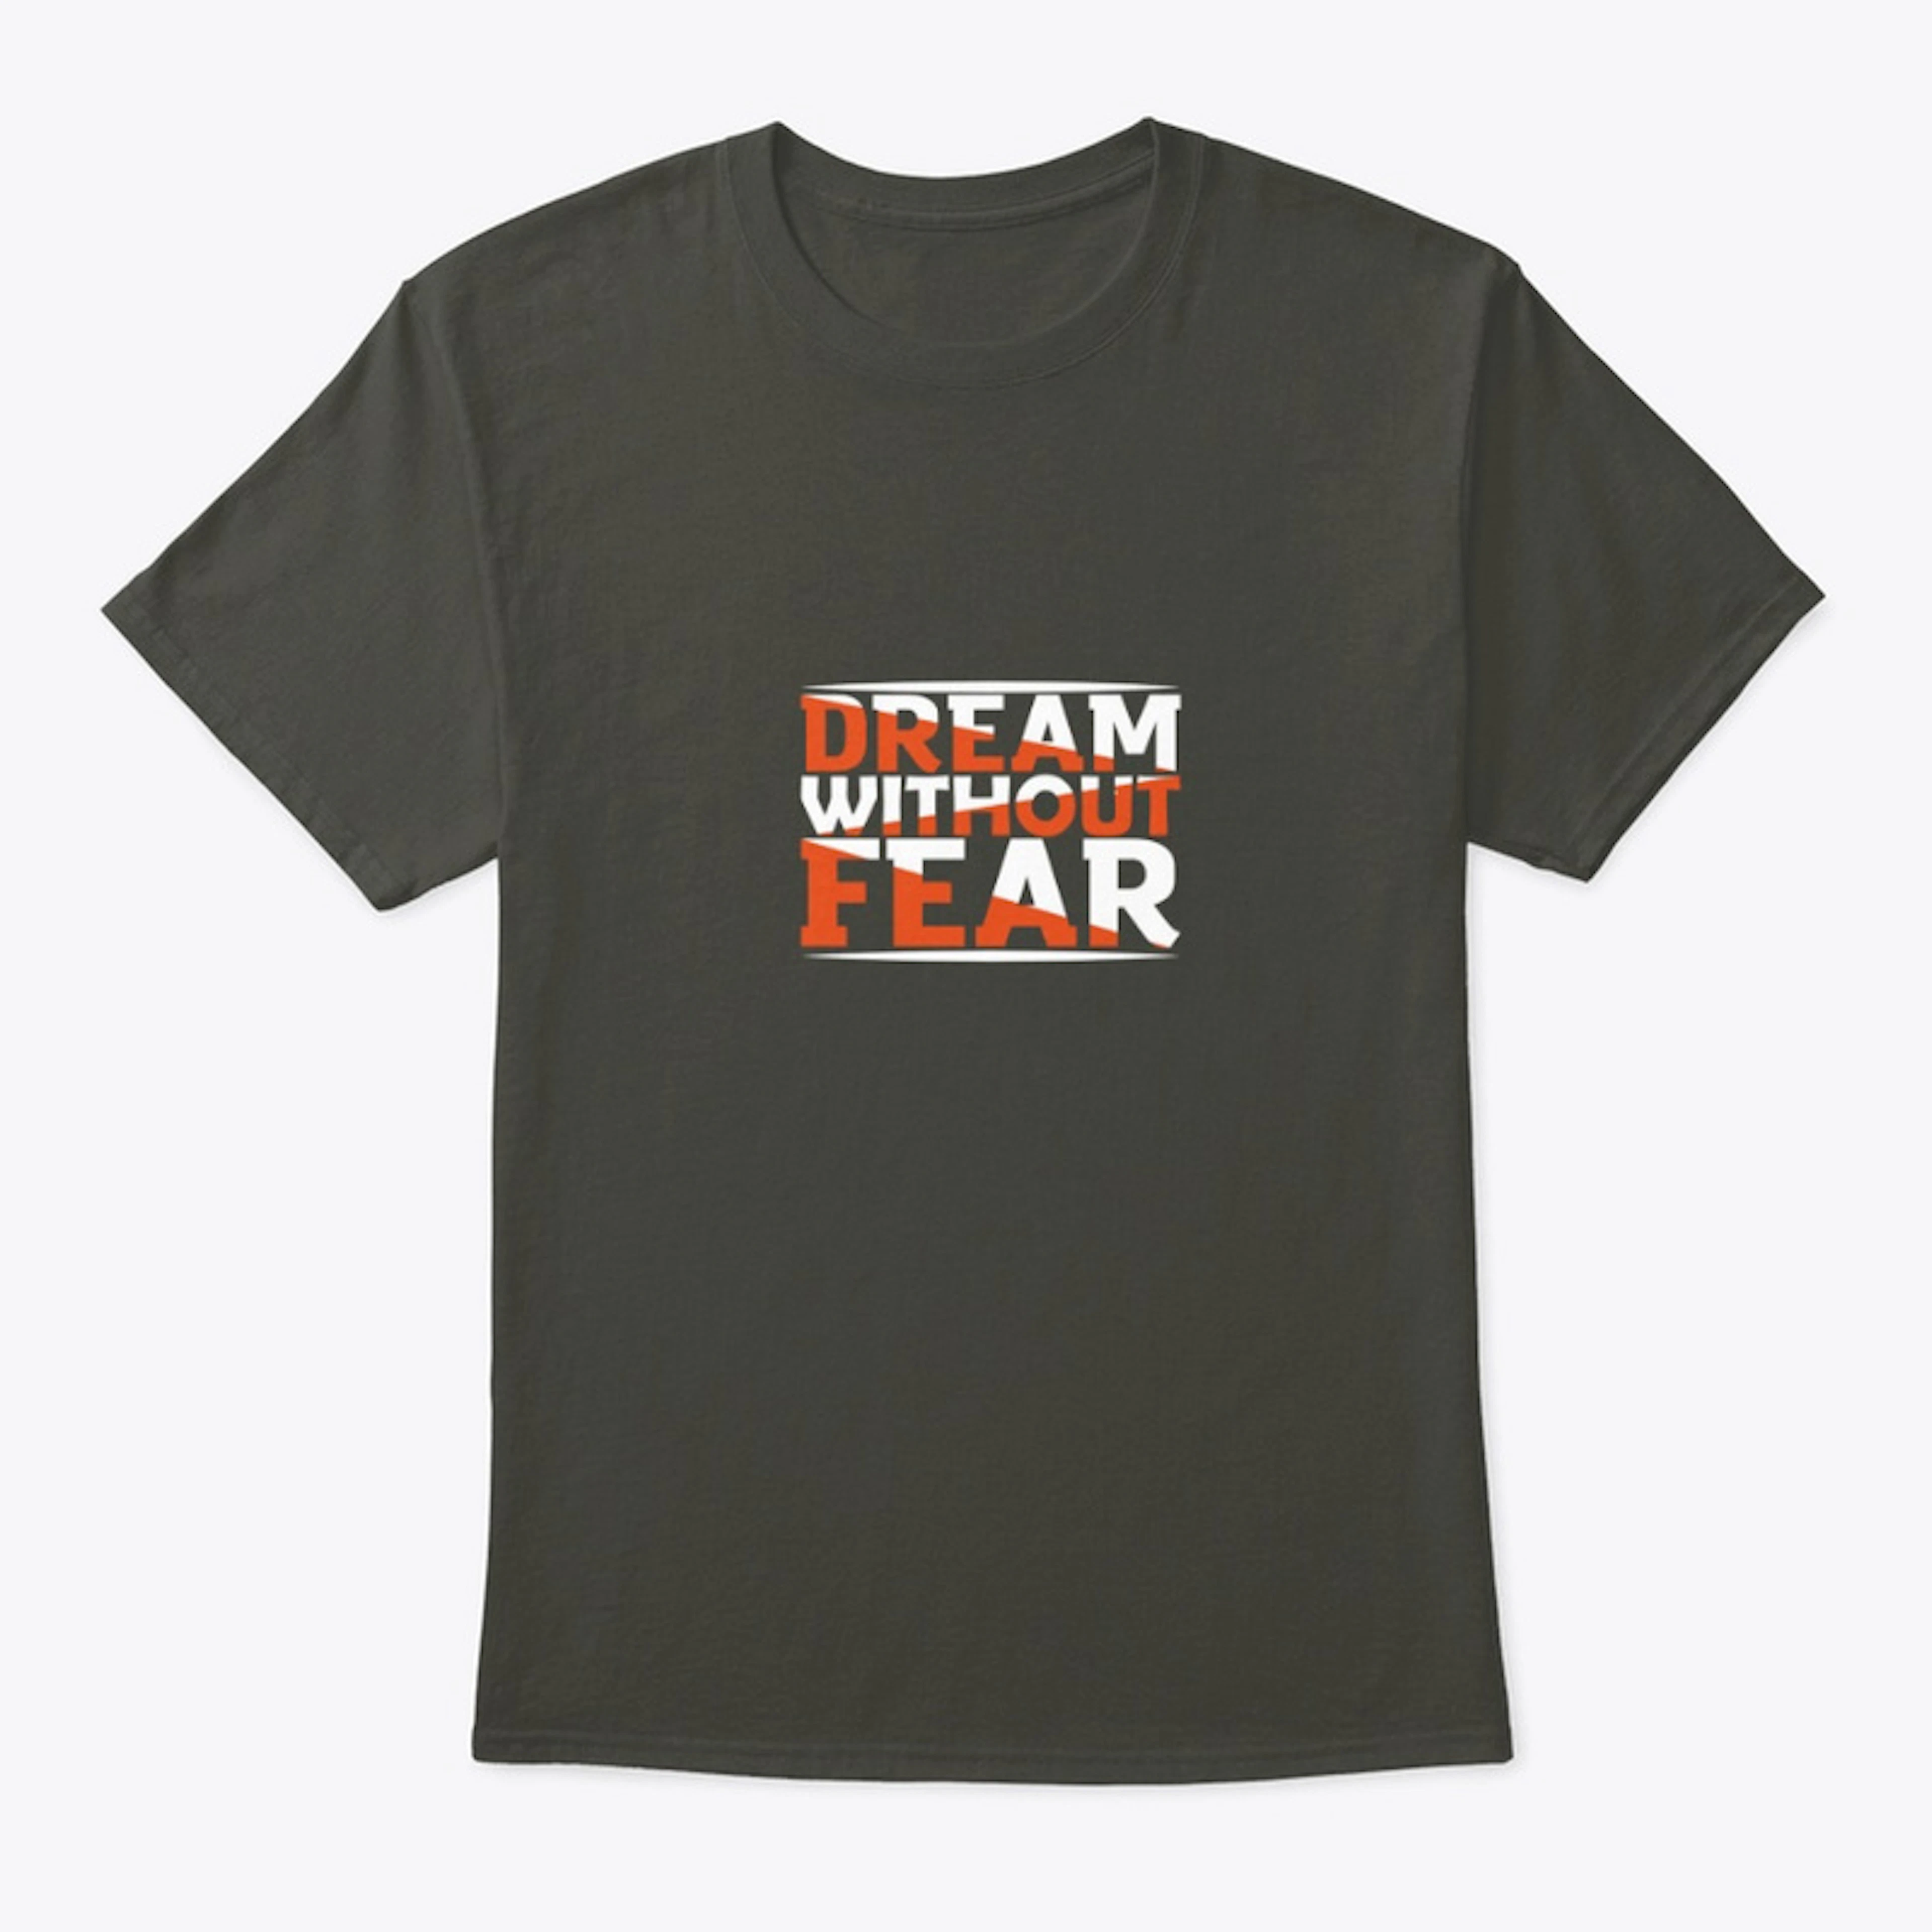 Dream without fear tee